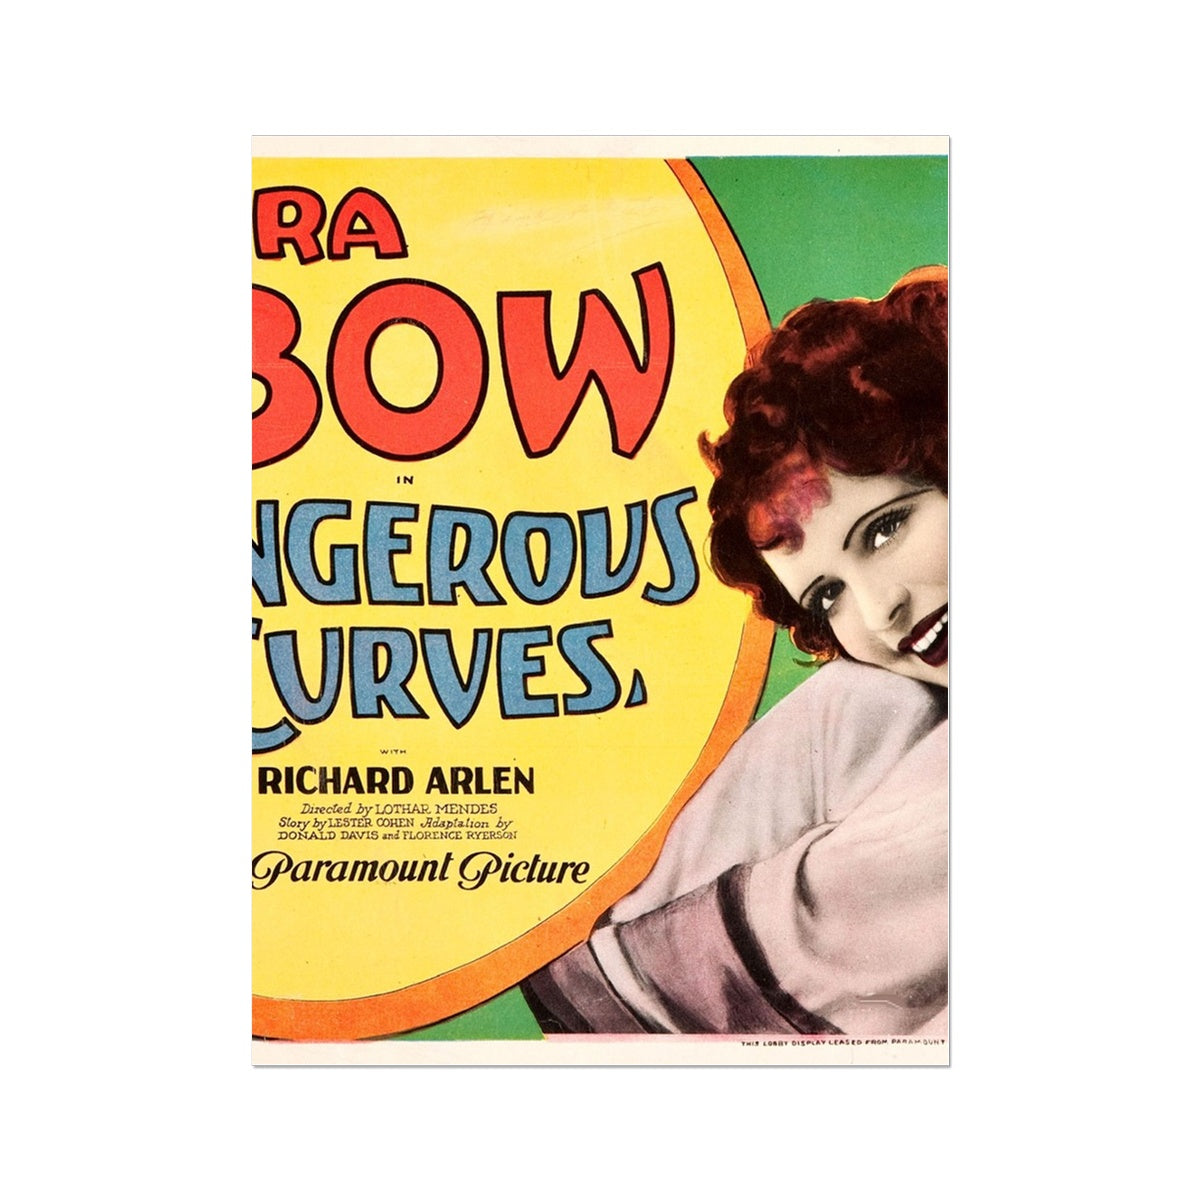 Clara Bow - Dangerous Curves Movie Poster Wall Art Poster